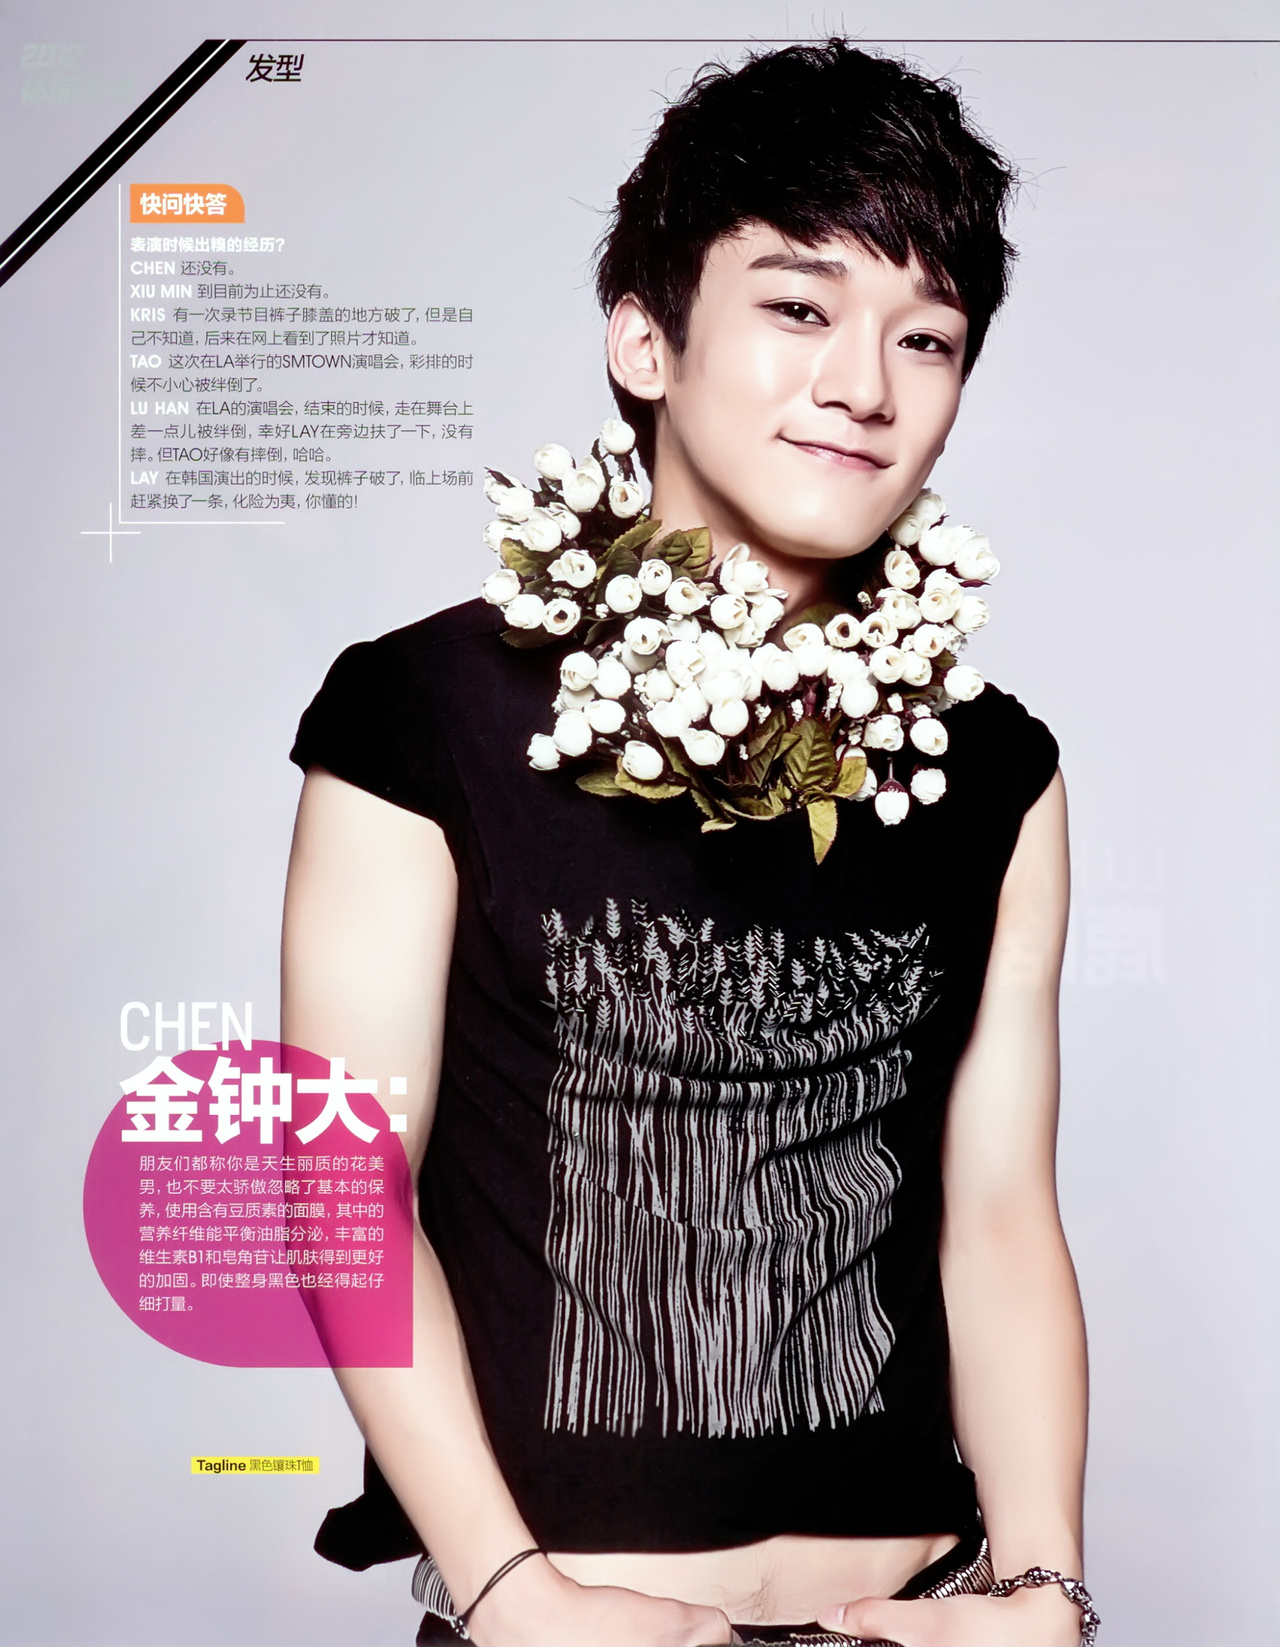  Health on Scans  Exo M For Men   S Health China Magazine  August 2012 Issue